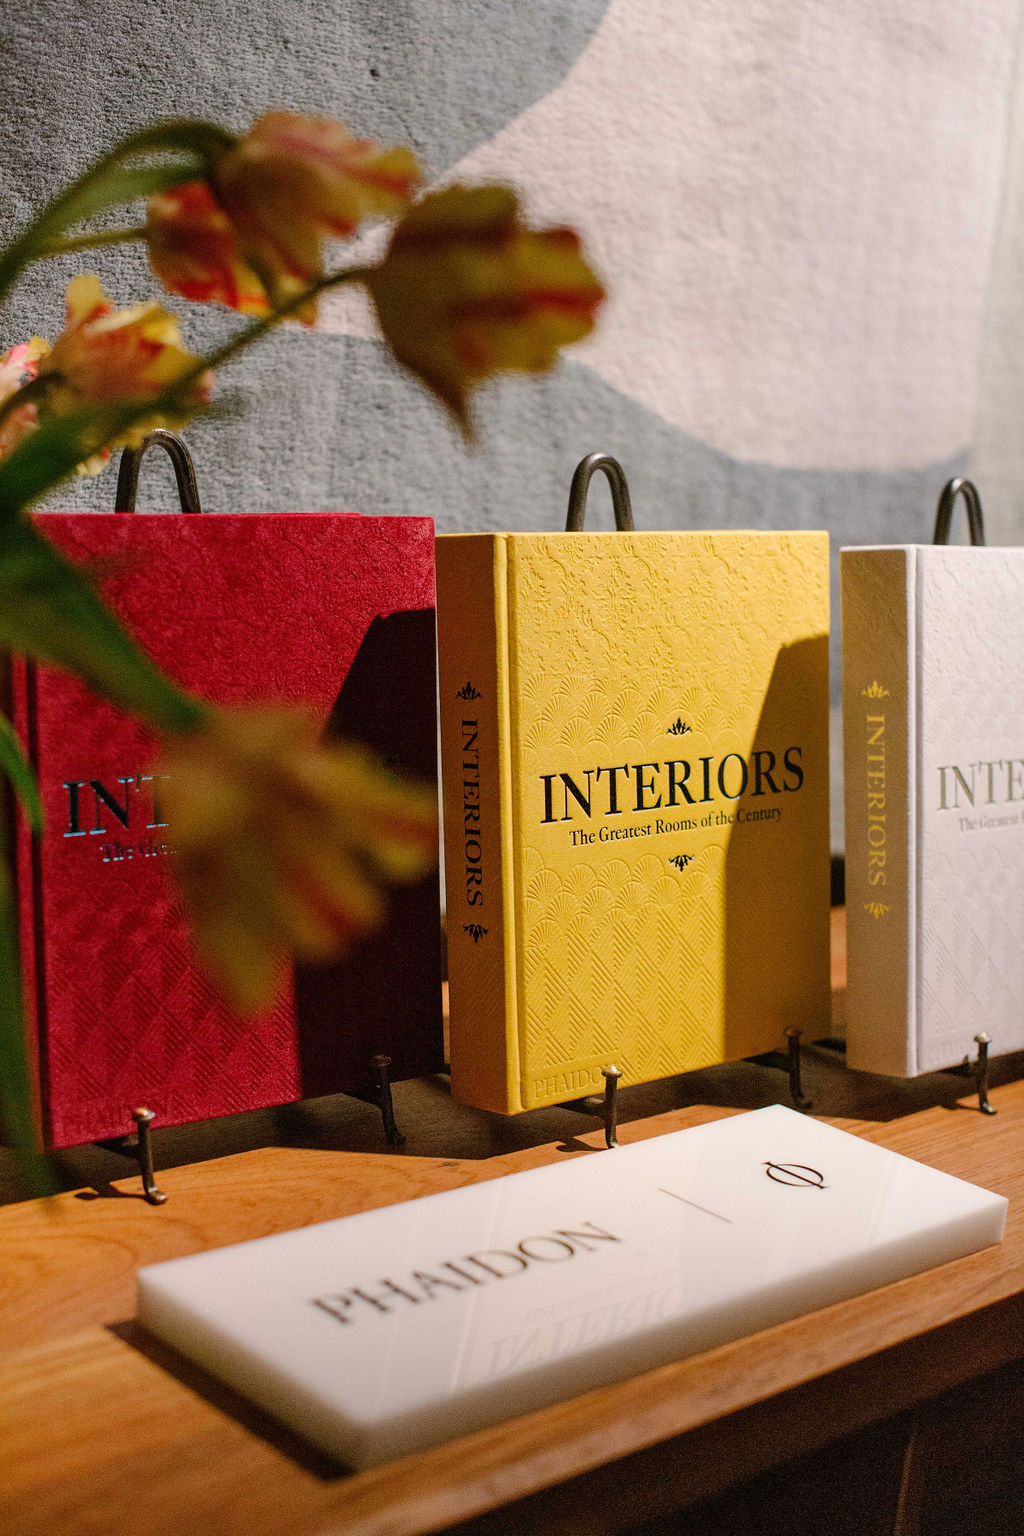 The launch for Interiors: The Greatest Rooms of the Century at Roman and Williams Guild New York